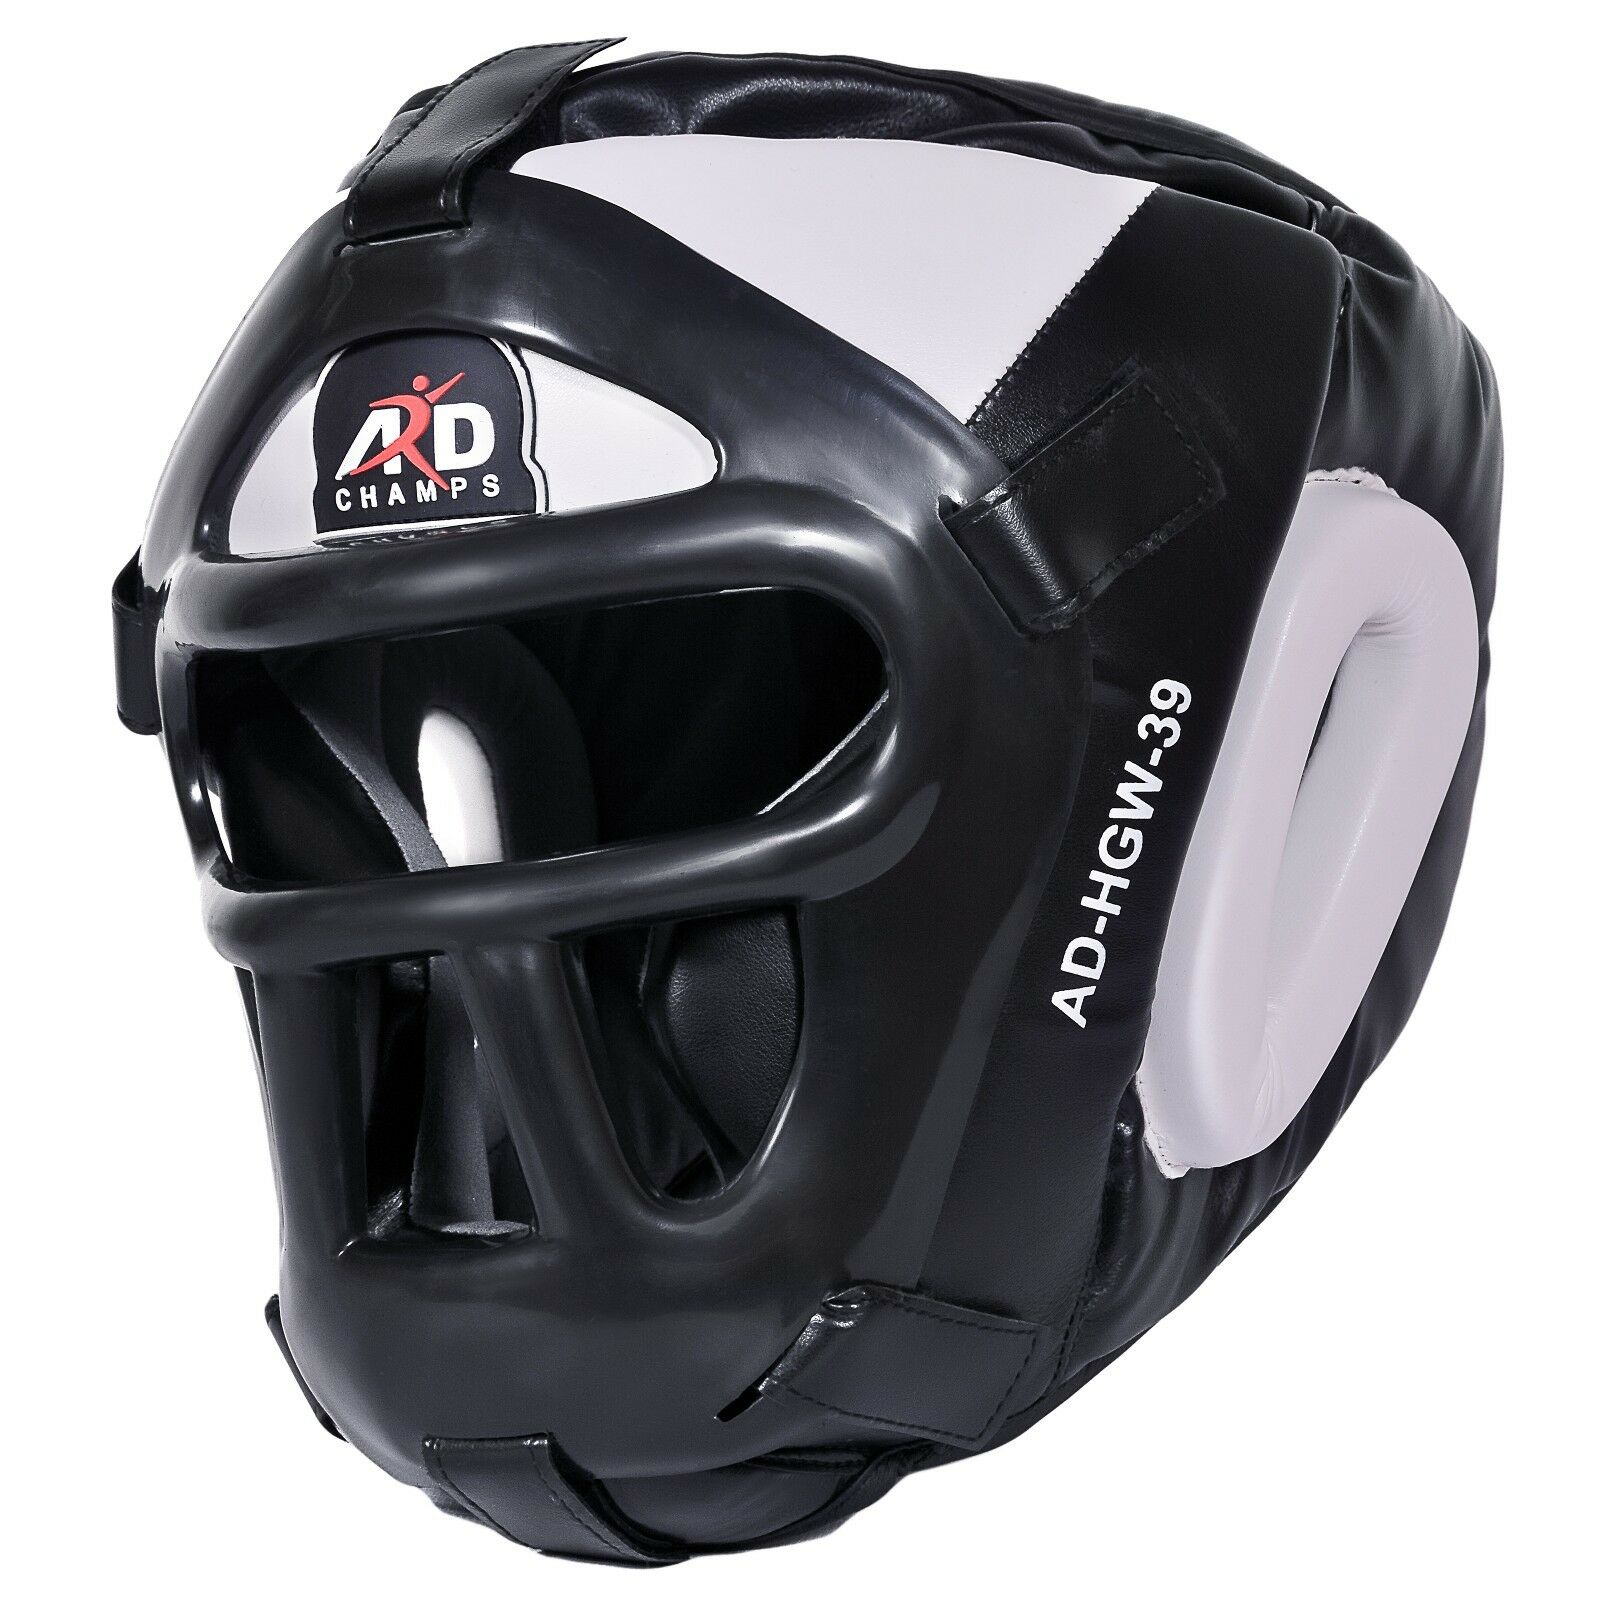 ARD CHAMPS™ Protector Guard Wrestling Helmet Head Gear Boxing MMA Rugby- White